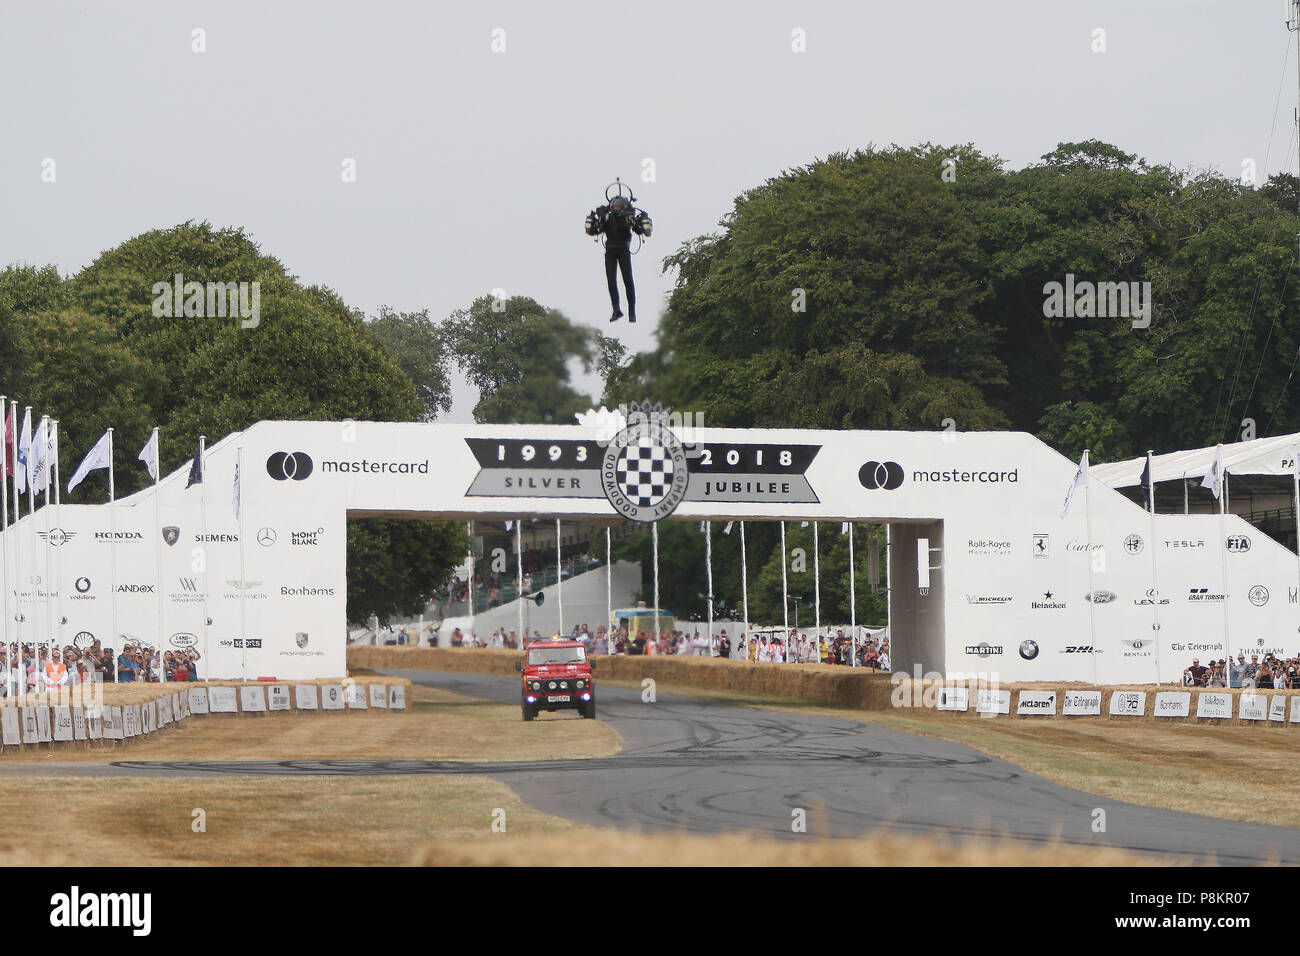 Goodwood, West Sussex, UK. 12th July 2018. jet pack at the 25th Goodwood Festival of Speed – The Silver Jubilee, in Goodwood, West Sussex, UK. © Malcolm Greig/Alamy Live News Stock Photo